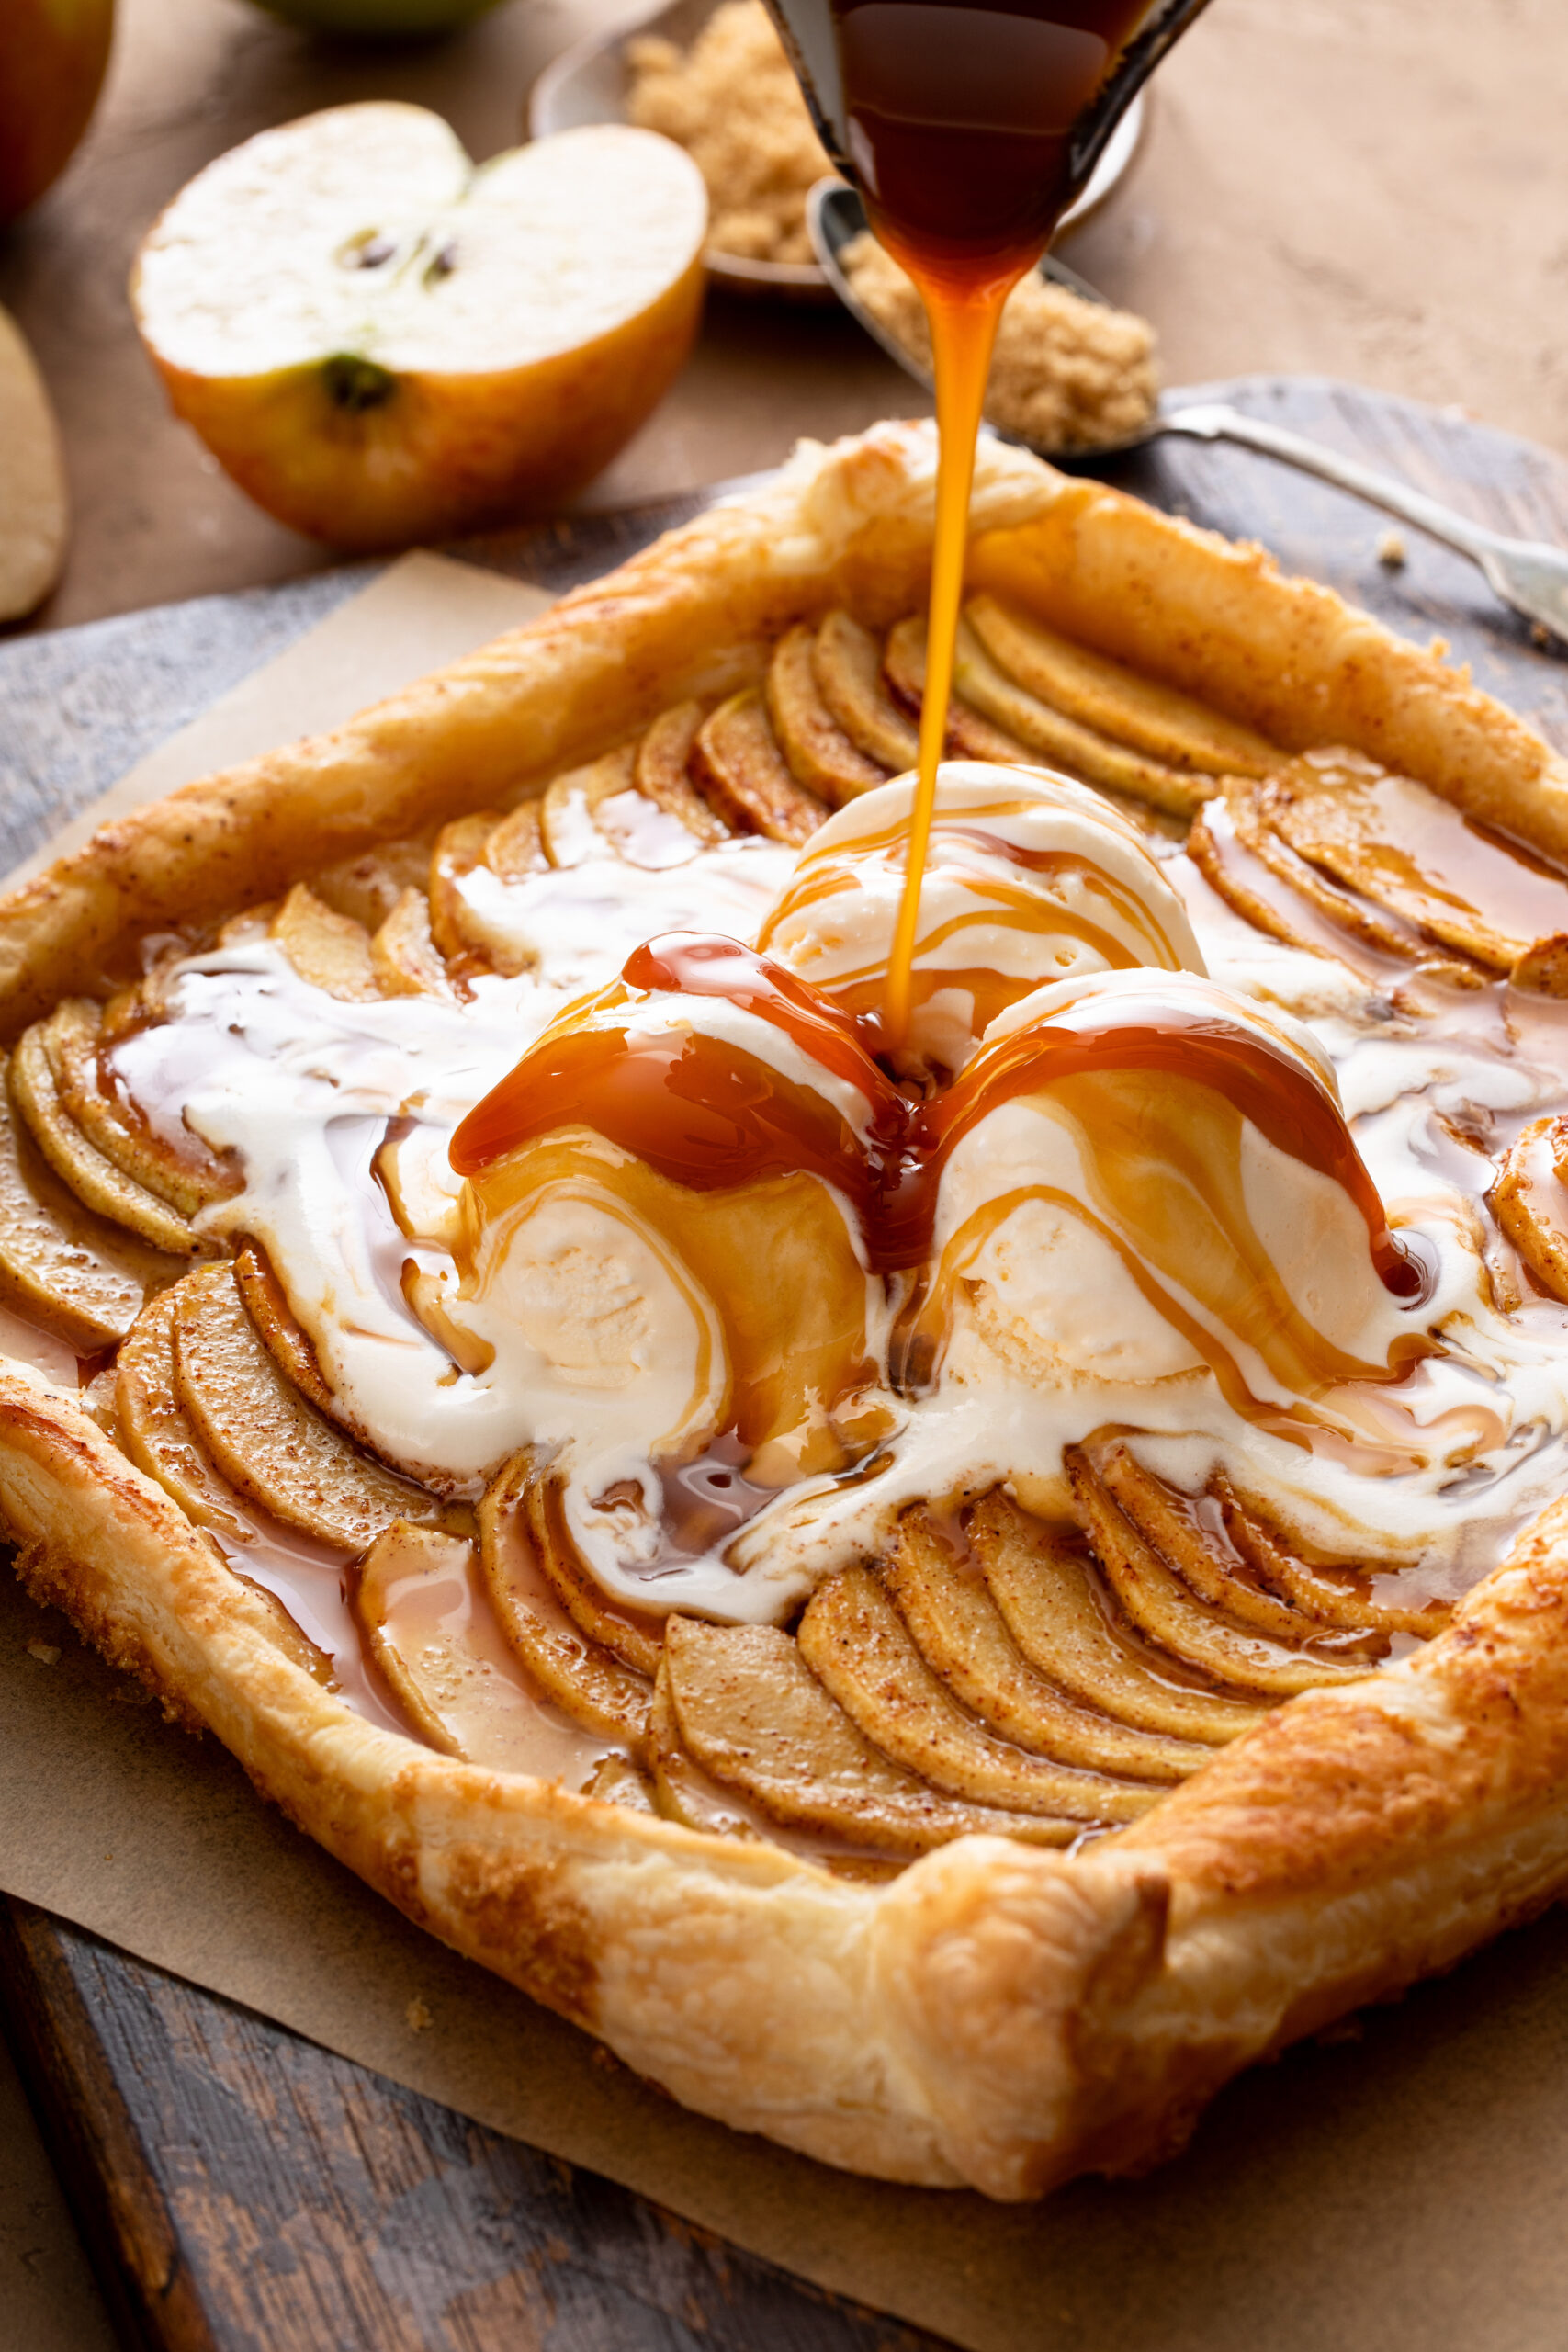 Looking for the perfect sweet summer treat? CLICK HERE to try the most amazing and easy Apple Gazette that the entire family will enjoy with each bite! 